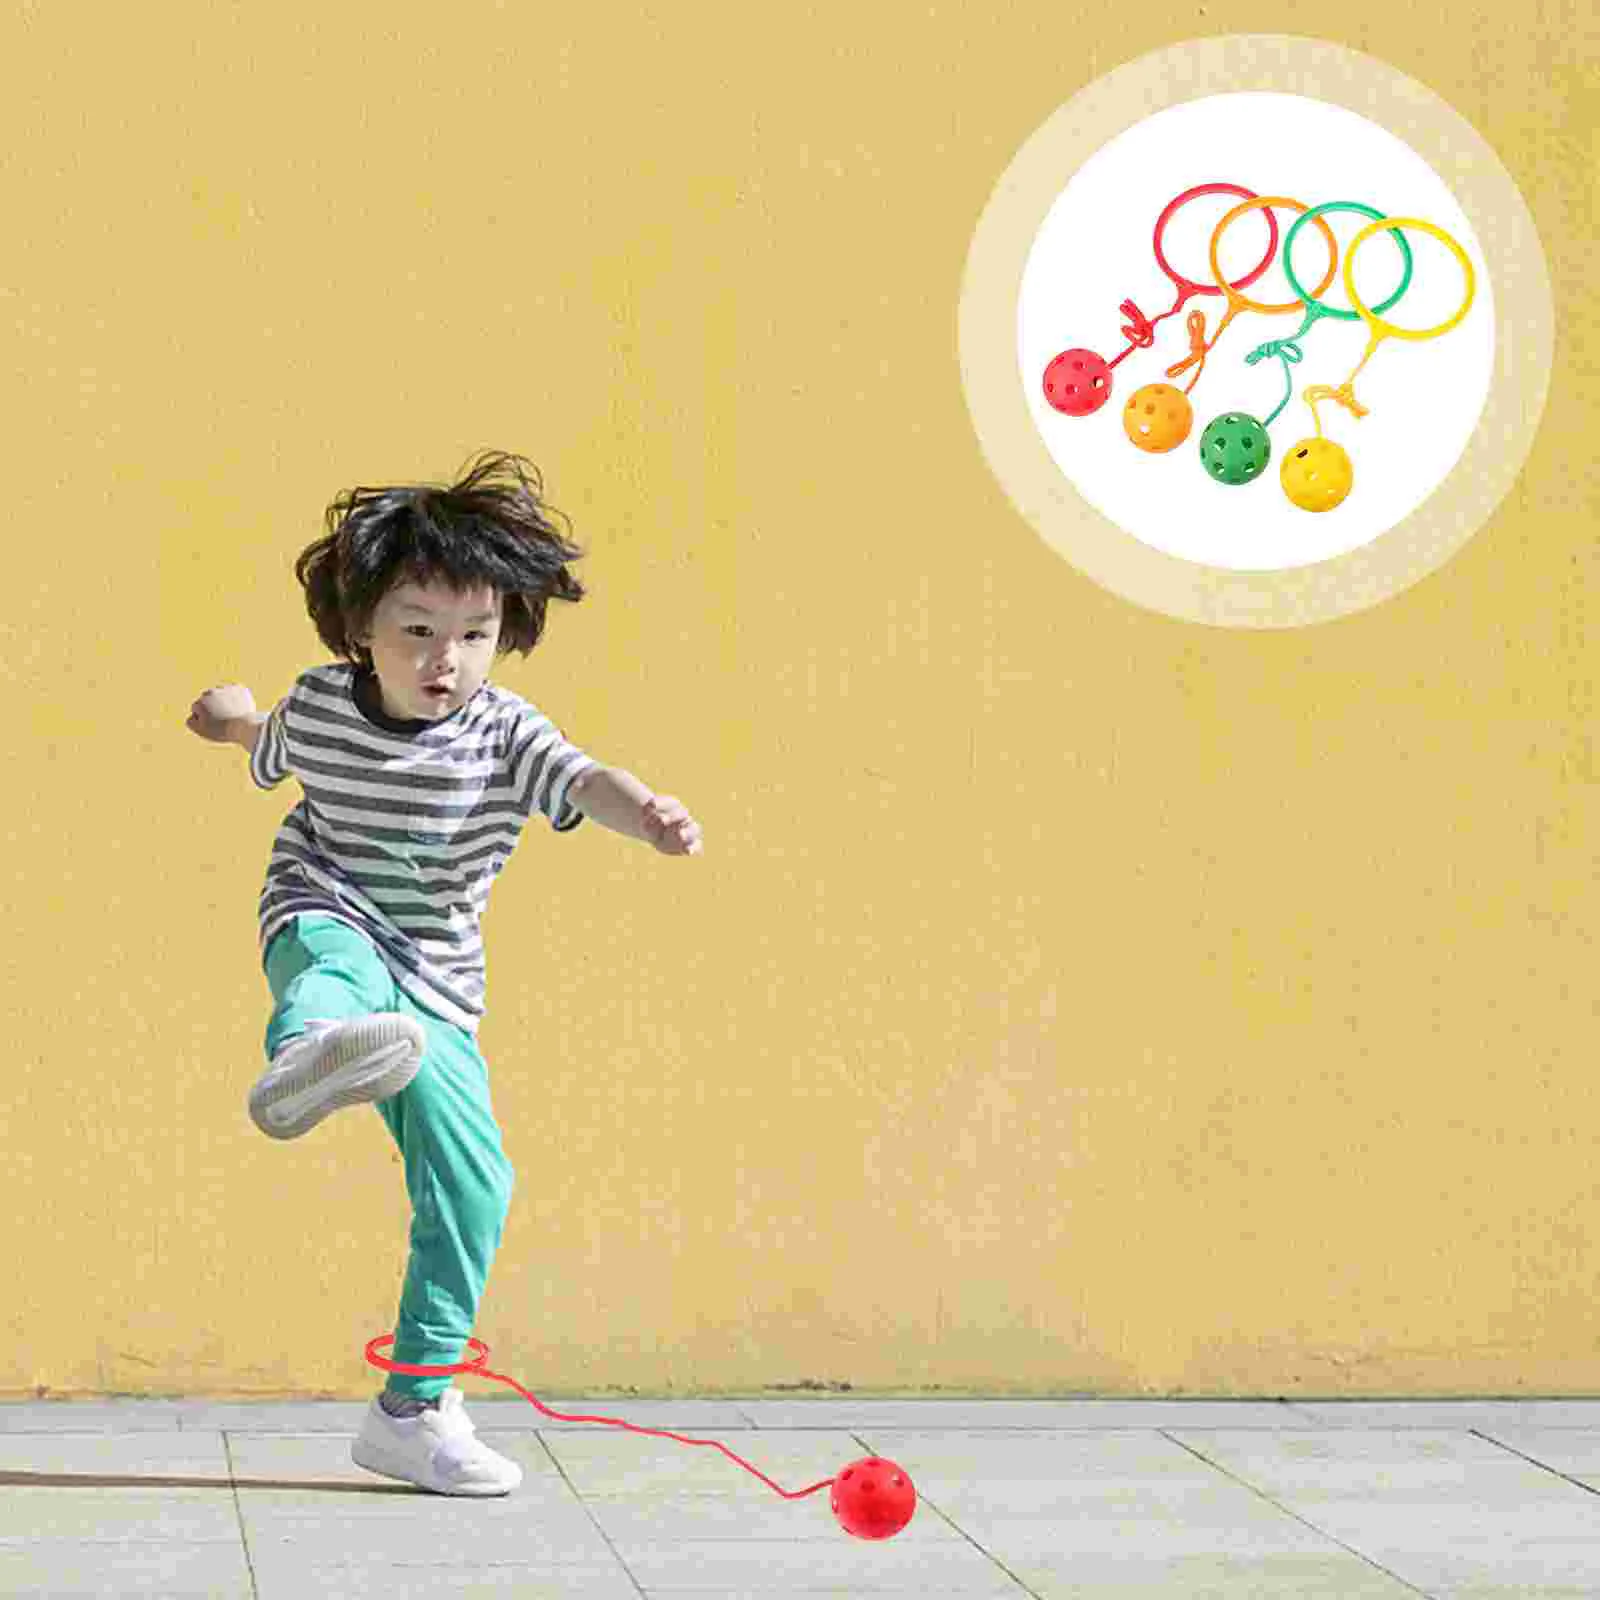 4 Pcs Bouncing Ball Toy Children Toys Kids Jumping Fun Games for Ankle Skipping Leg Balls Plastic Fitness Equipment flash jumping rope ball kids outdoor fun sports toy training swing ball led children jumping force reaction child parent games